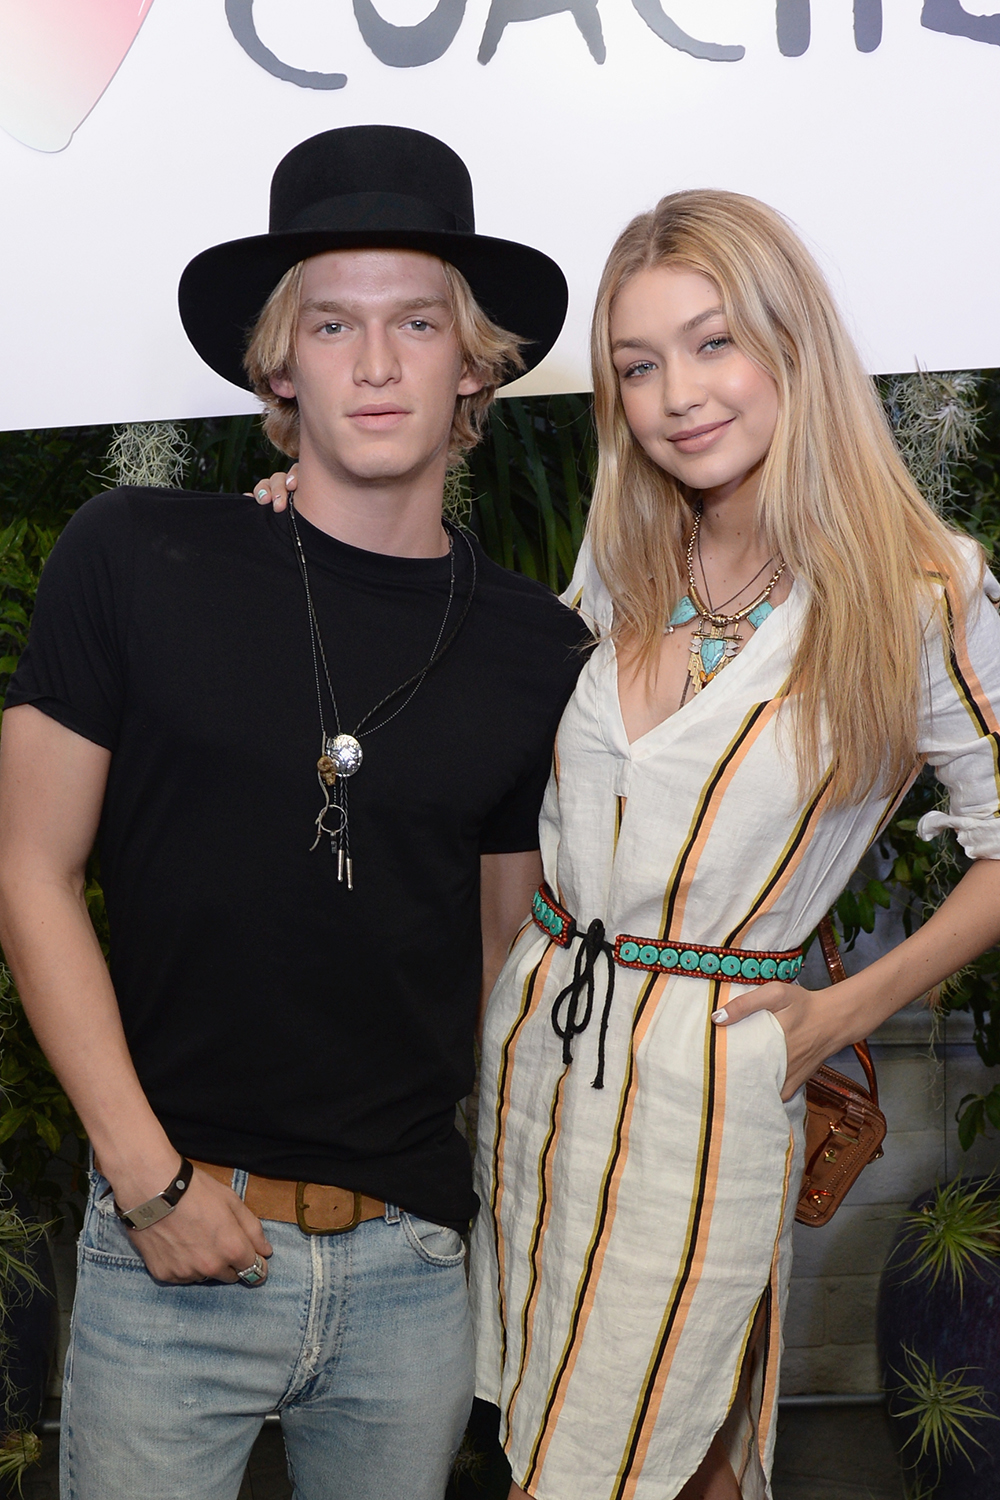 Just before Gigi Hadid started her word domination on the modelling world. she was dating Australian singer Cody Simpson. The couple were together for four years before breaking up in 2015